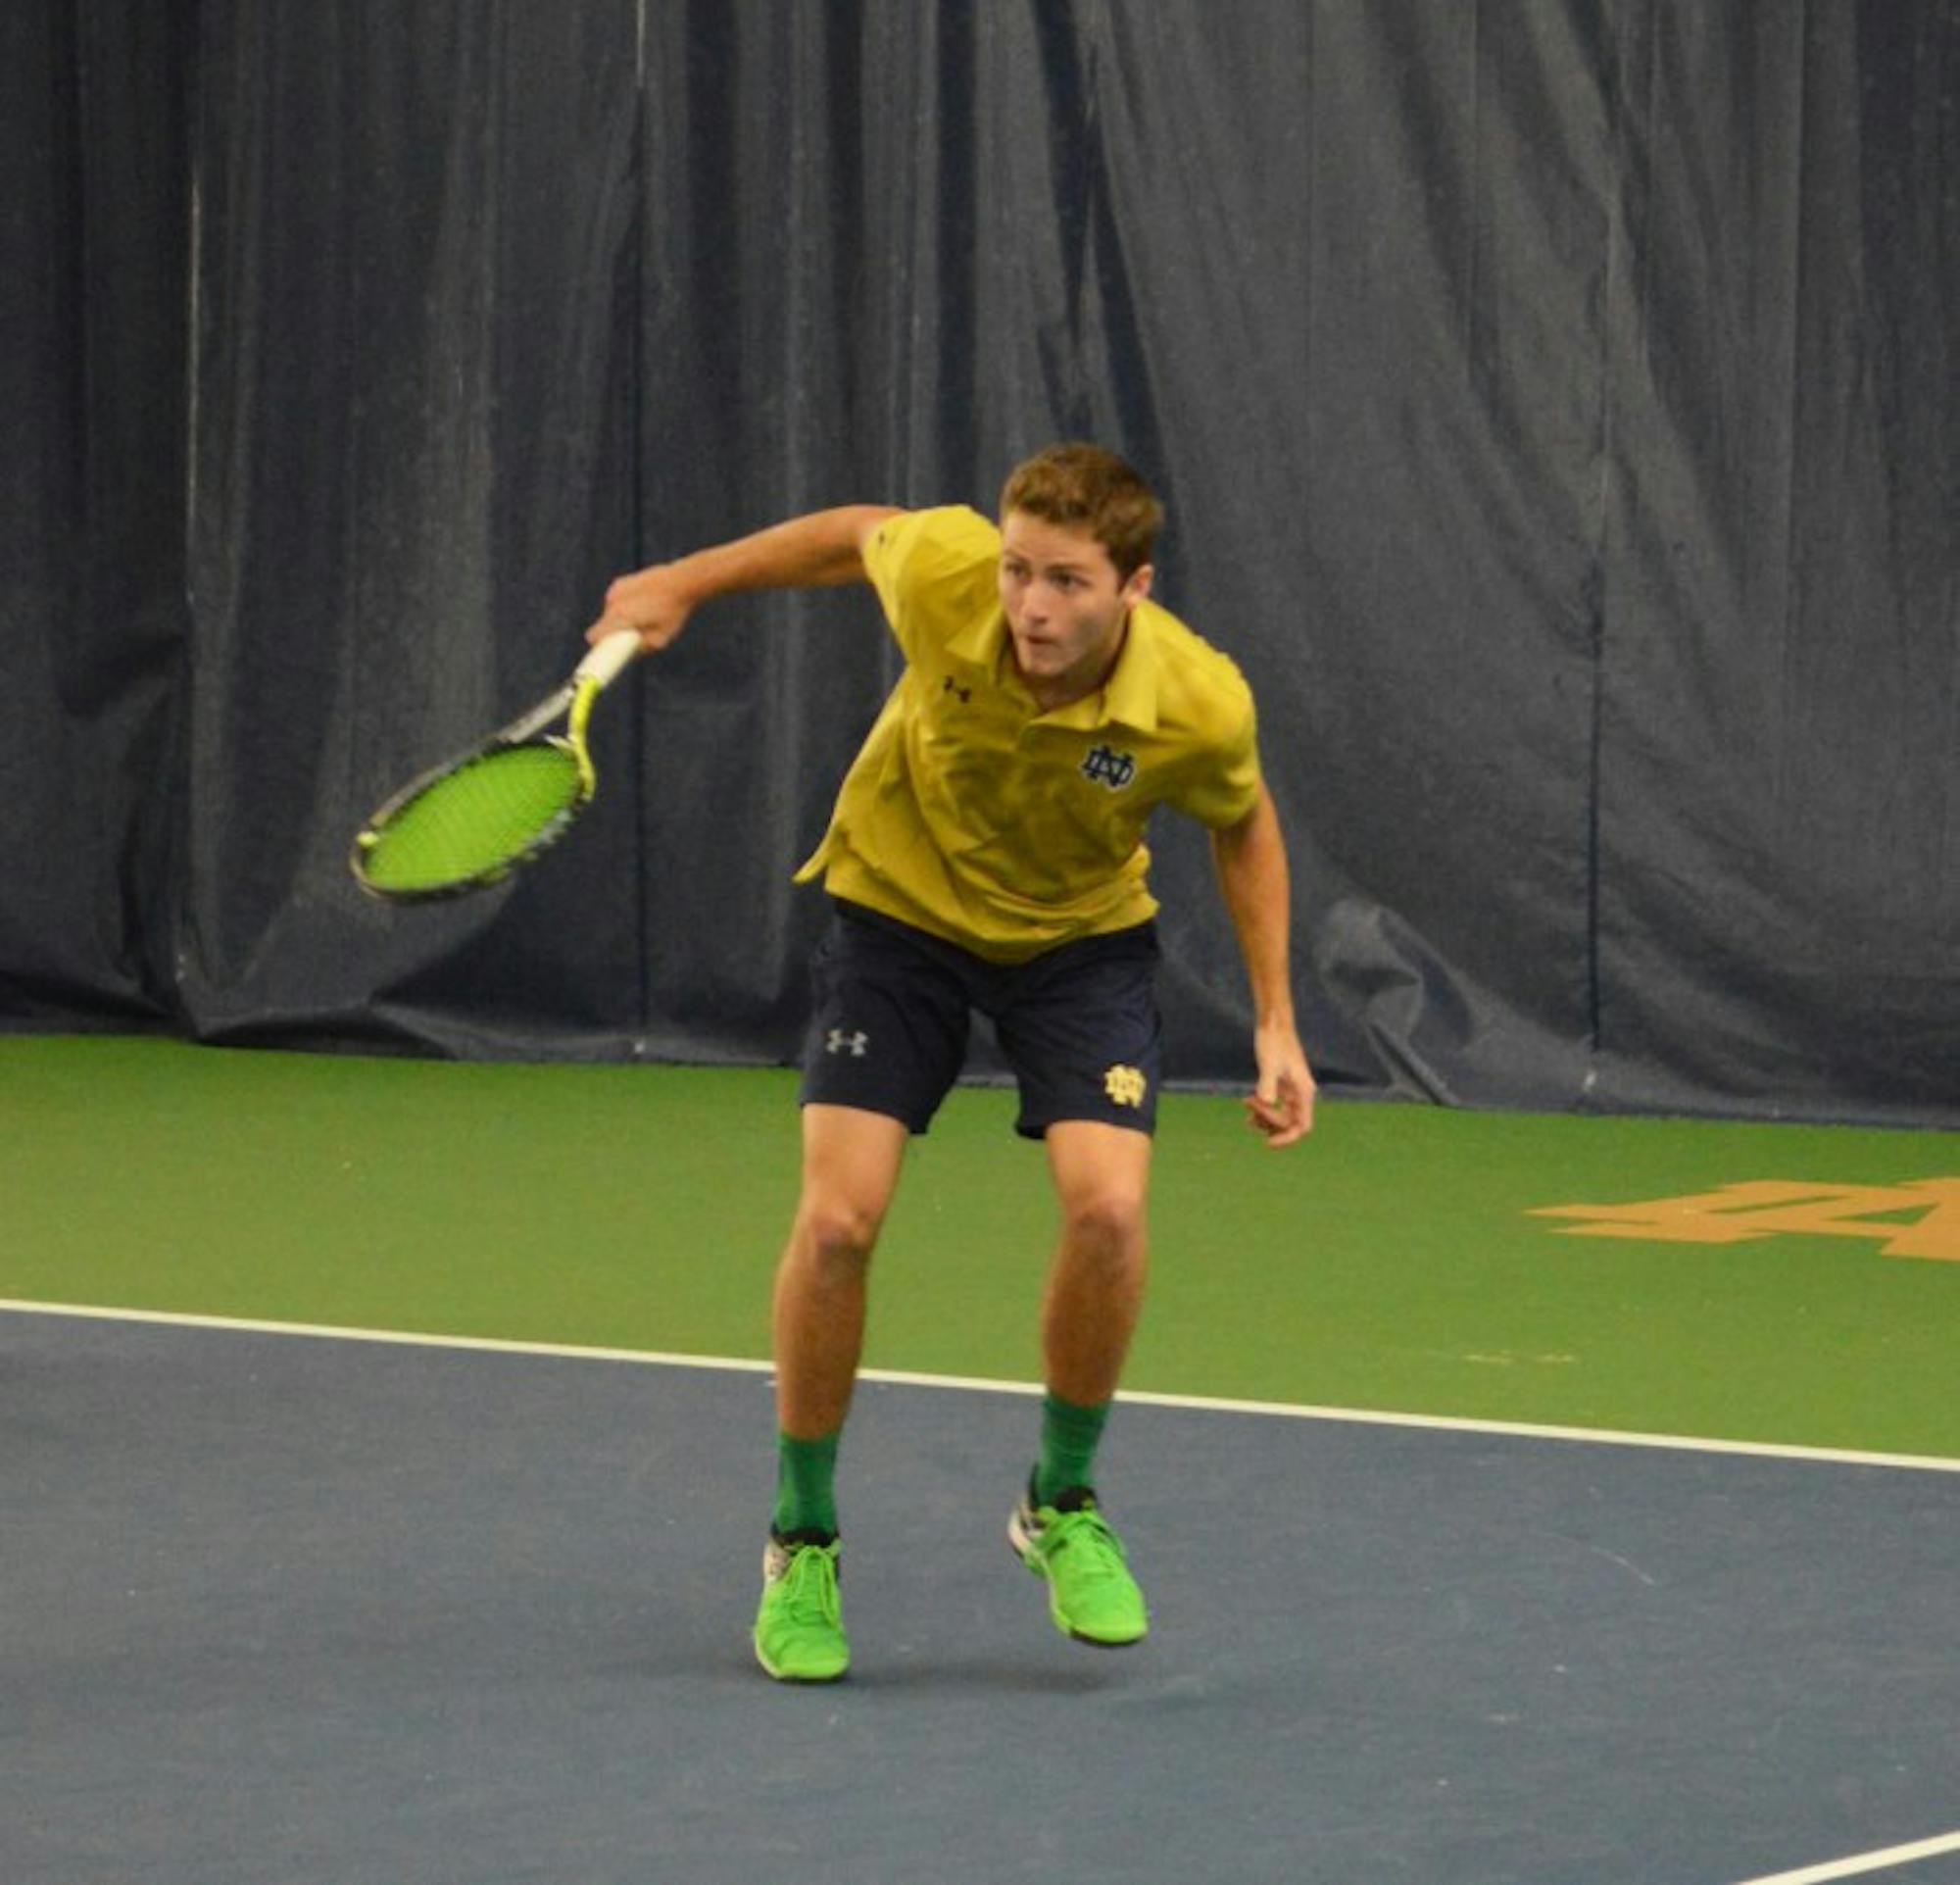 Irish senior Quentin Monaghan follows through on a forehand shot during Notre Dame’s 5-2 win over Duke on March 18.